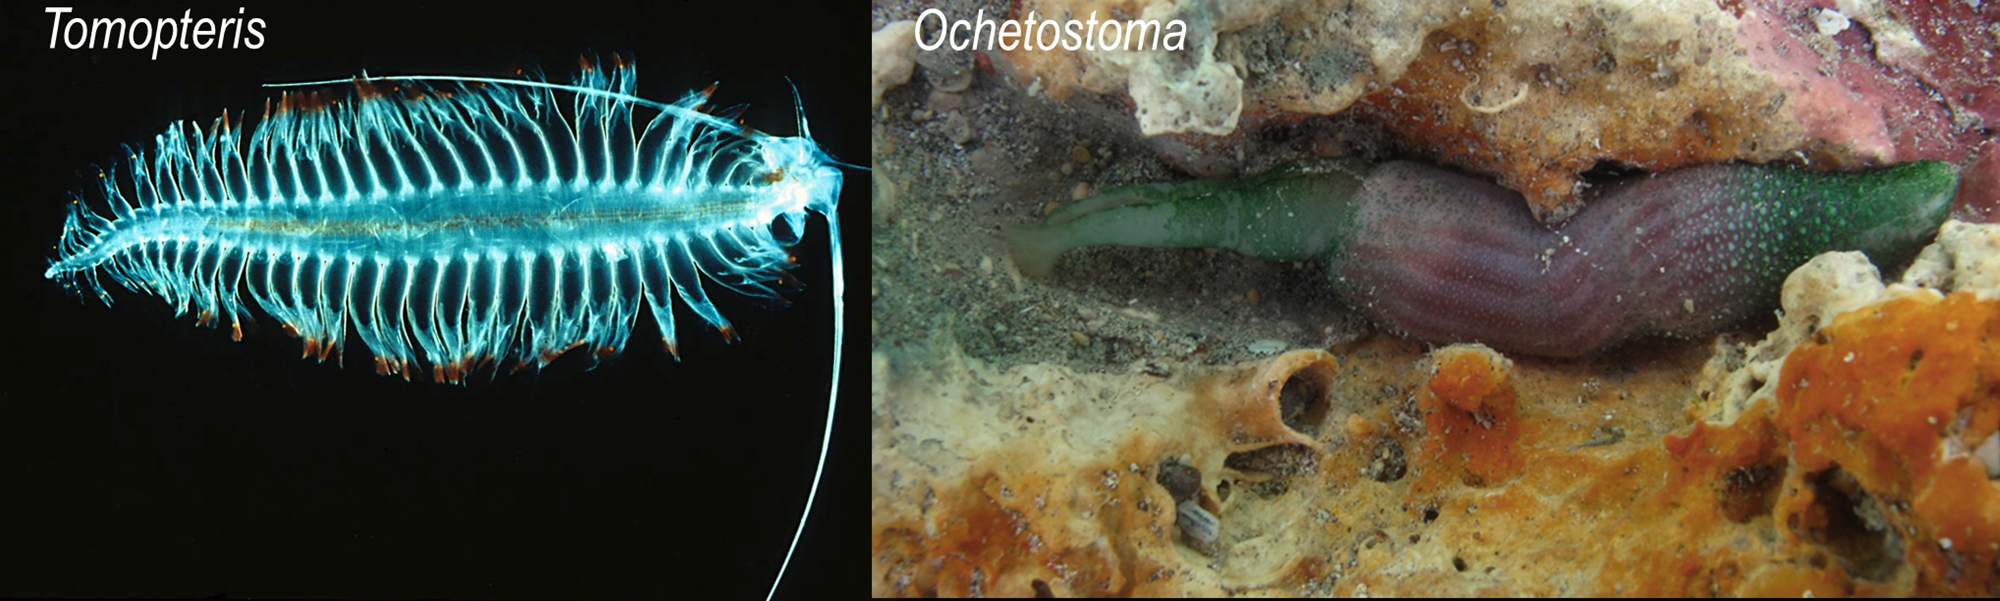 <p>The annelid worms pictured below weigh 6.0 grams each. Like other Annelida, Tomopteris and Ochetostoma obtain oxygen for respiration via diffusion across their external surfaces. Based on what you can see in the photos, which worm has the higher maximum oxygen uptake potential? a. Ochetostoma b. Tomopterous</p>